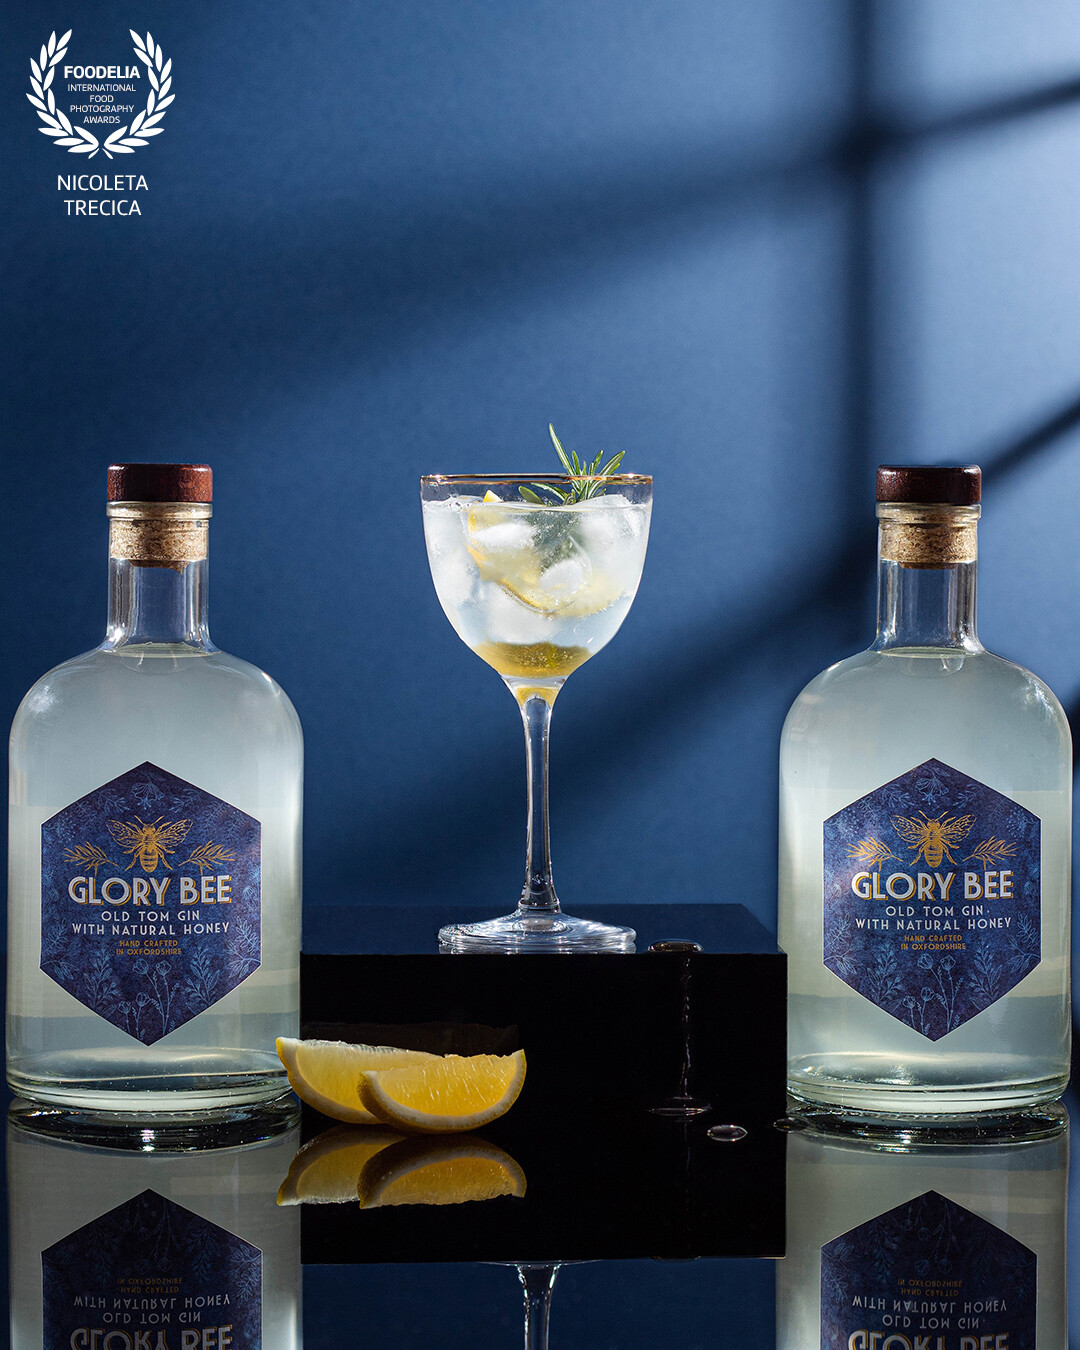 This image was created for a client, combining the product history with the ingredients of the gin. The gobo effect idea came when I had realised how could I give to the product more interest.